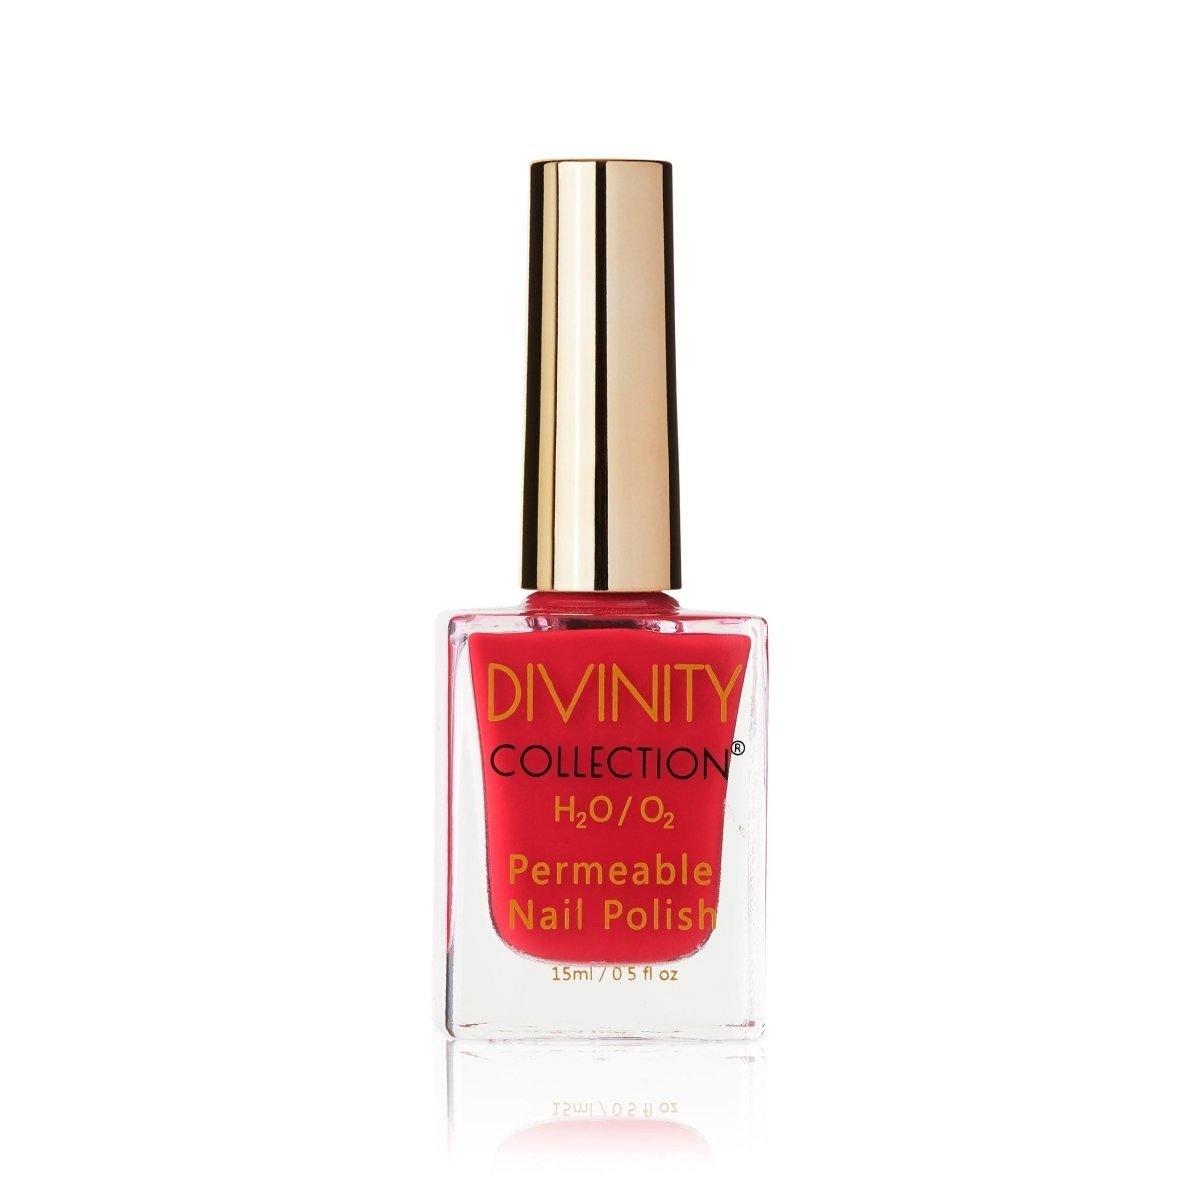 Divinity Collection Permeable Halal Nail Polish - Scarlet - Divinity Collection